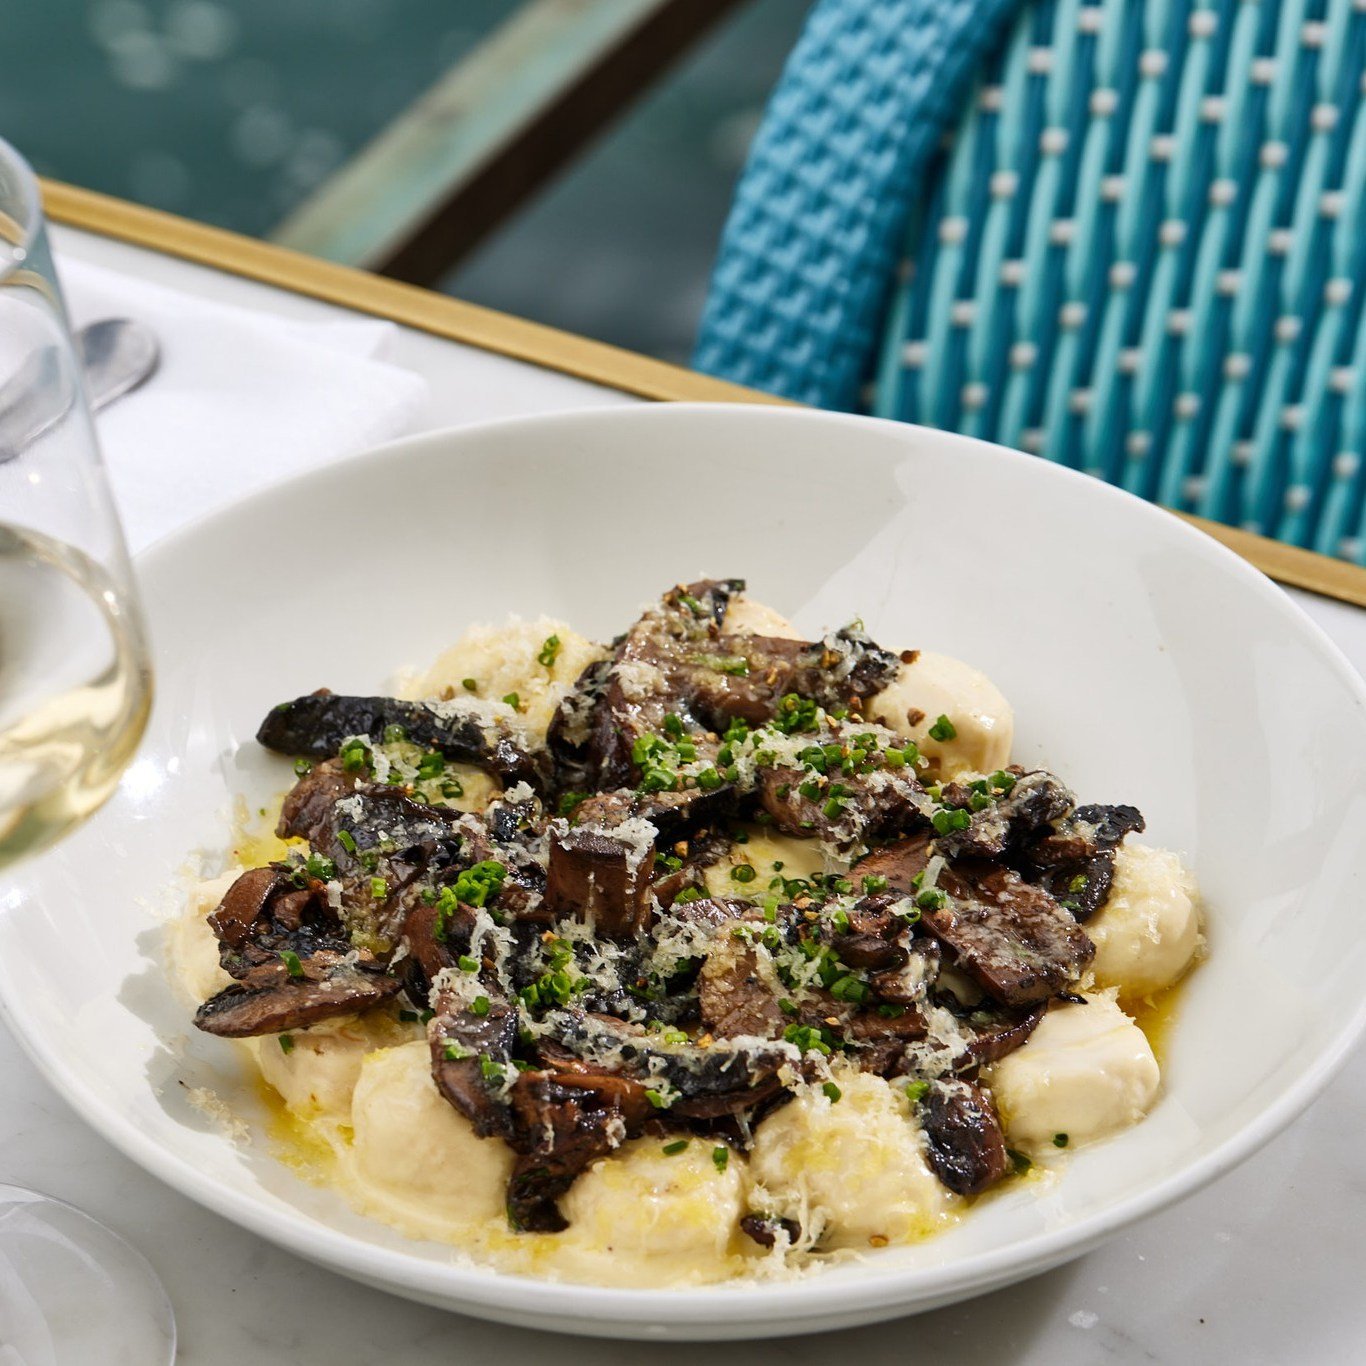 Gnocchi &agrave; la parisienne - This French version of gnocchi uses choux pastry as a base, featuring C&egrave;pe &amp; swiss mushrooms and Comt&eacute; this signature dish is full of flavour.

#whalebridge #onthemenu